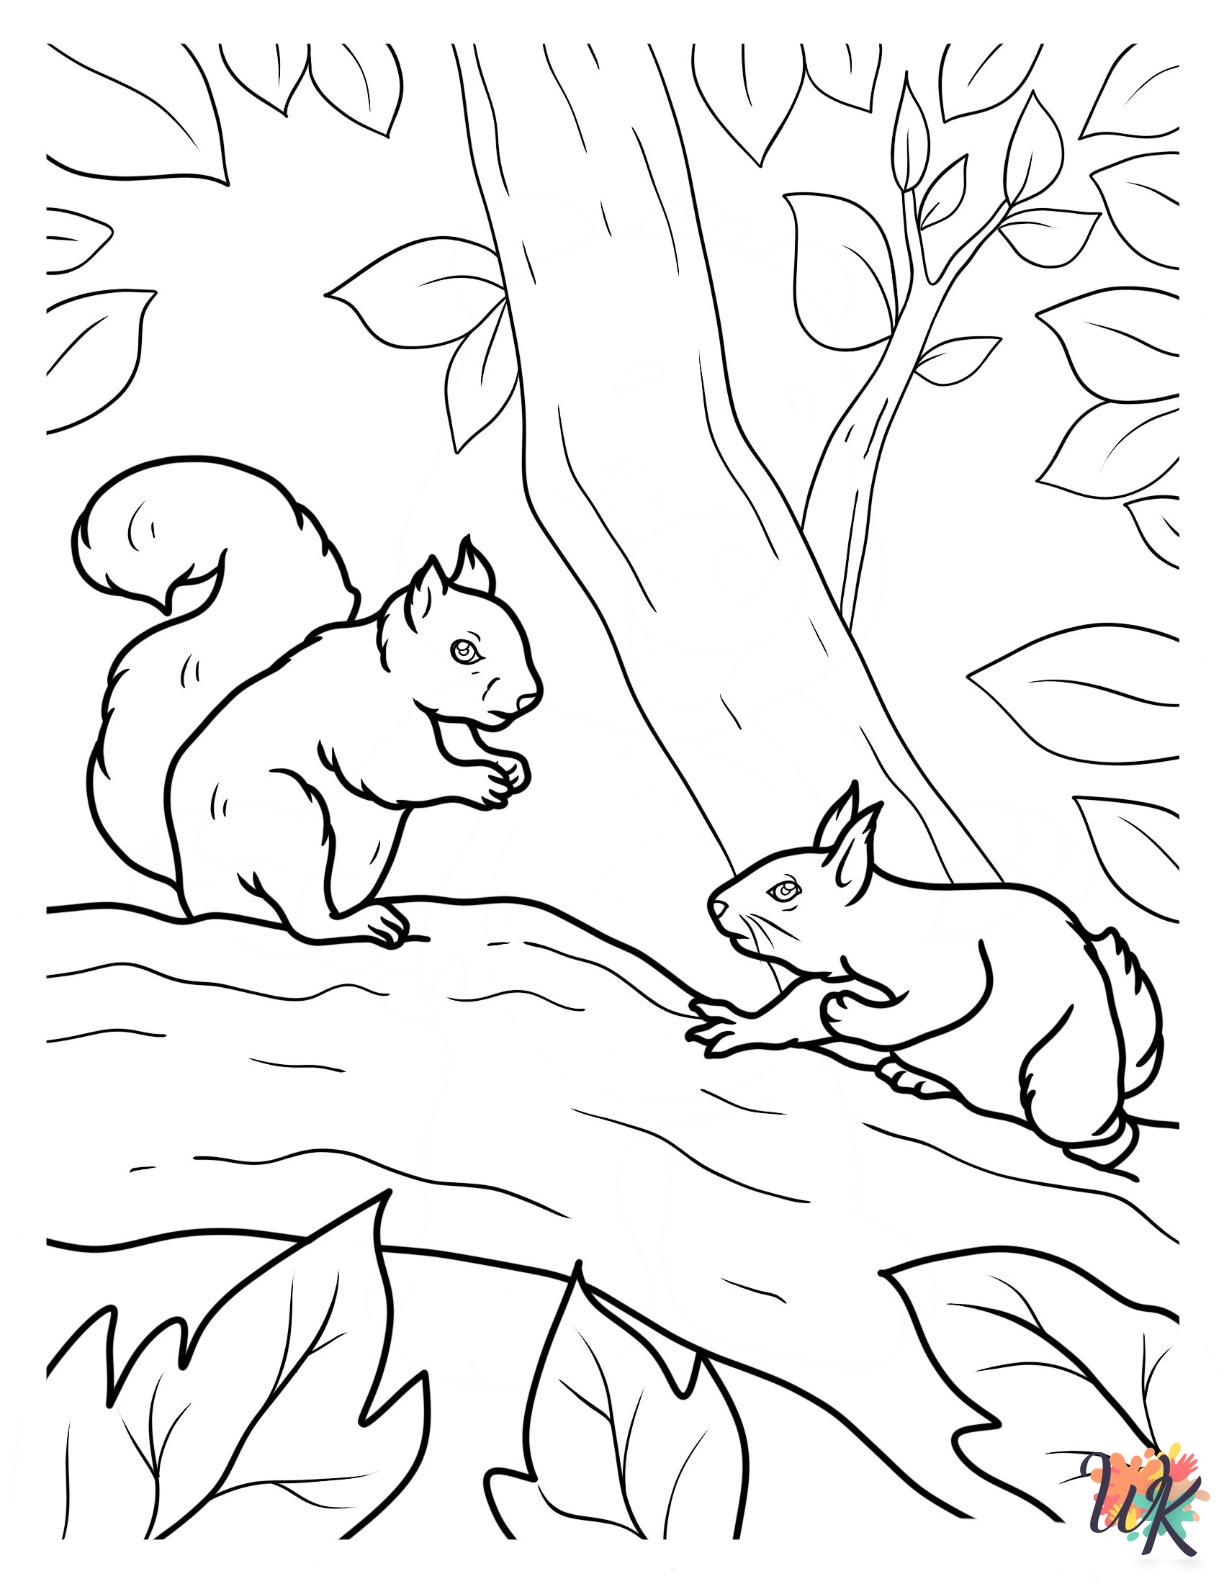 Squirrel adult coloring pages